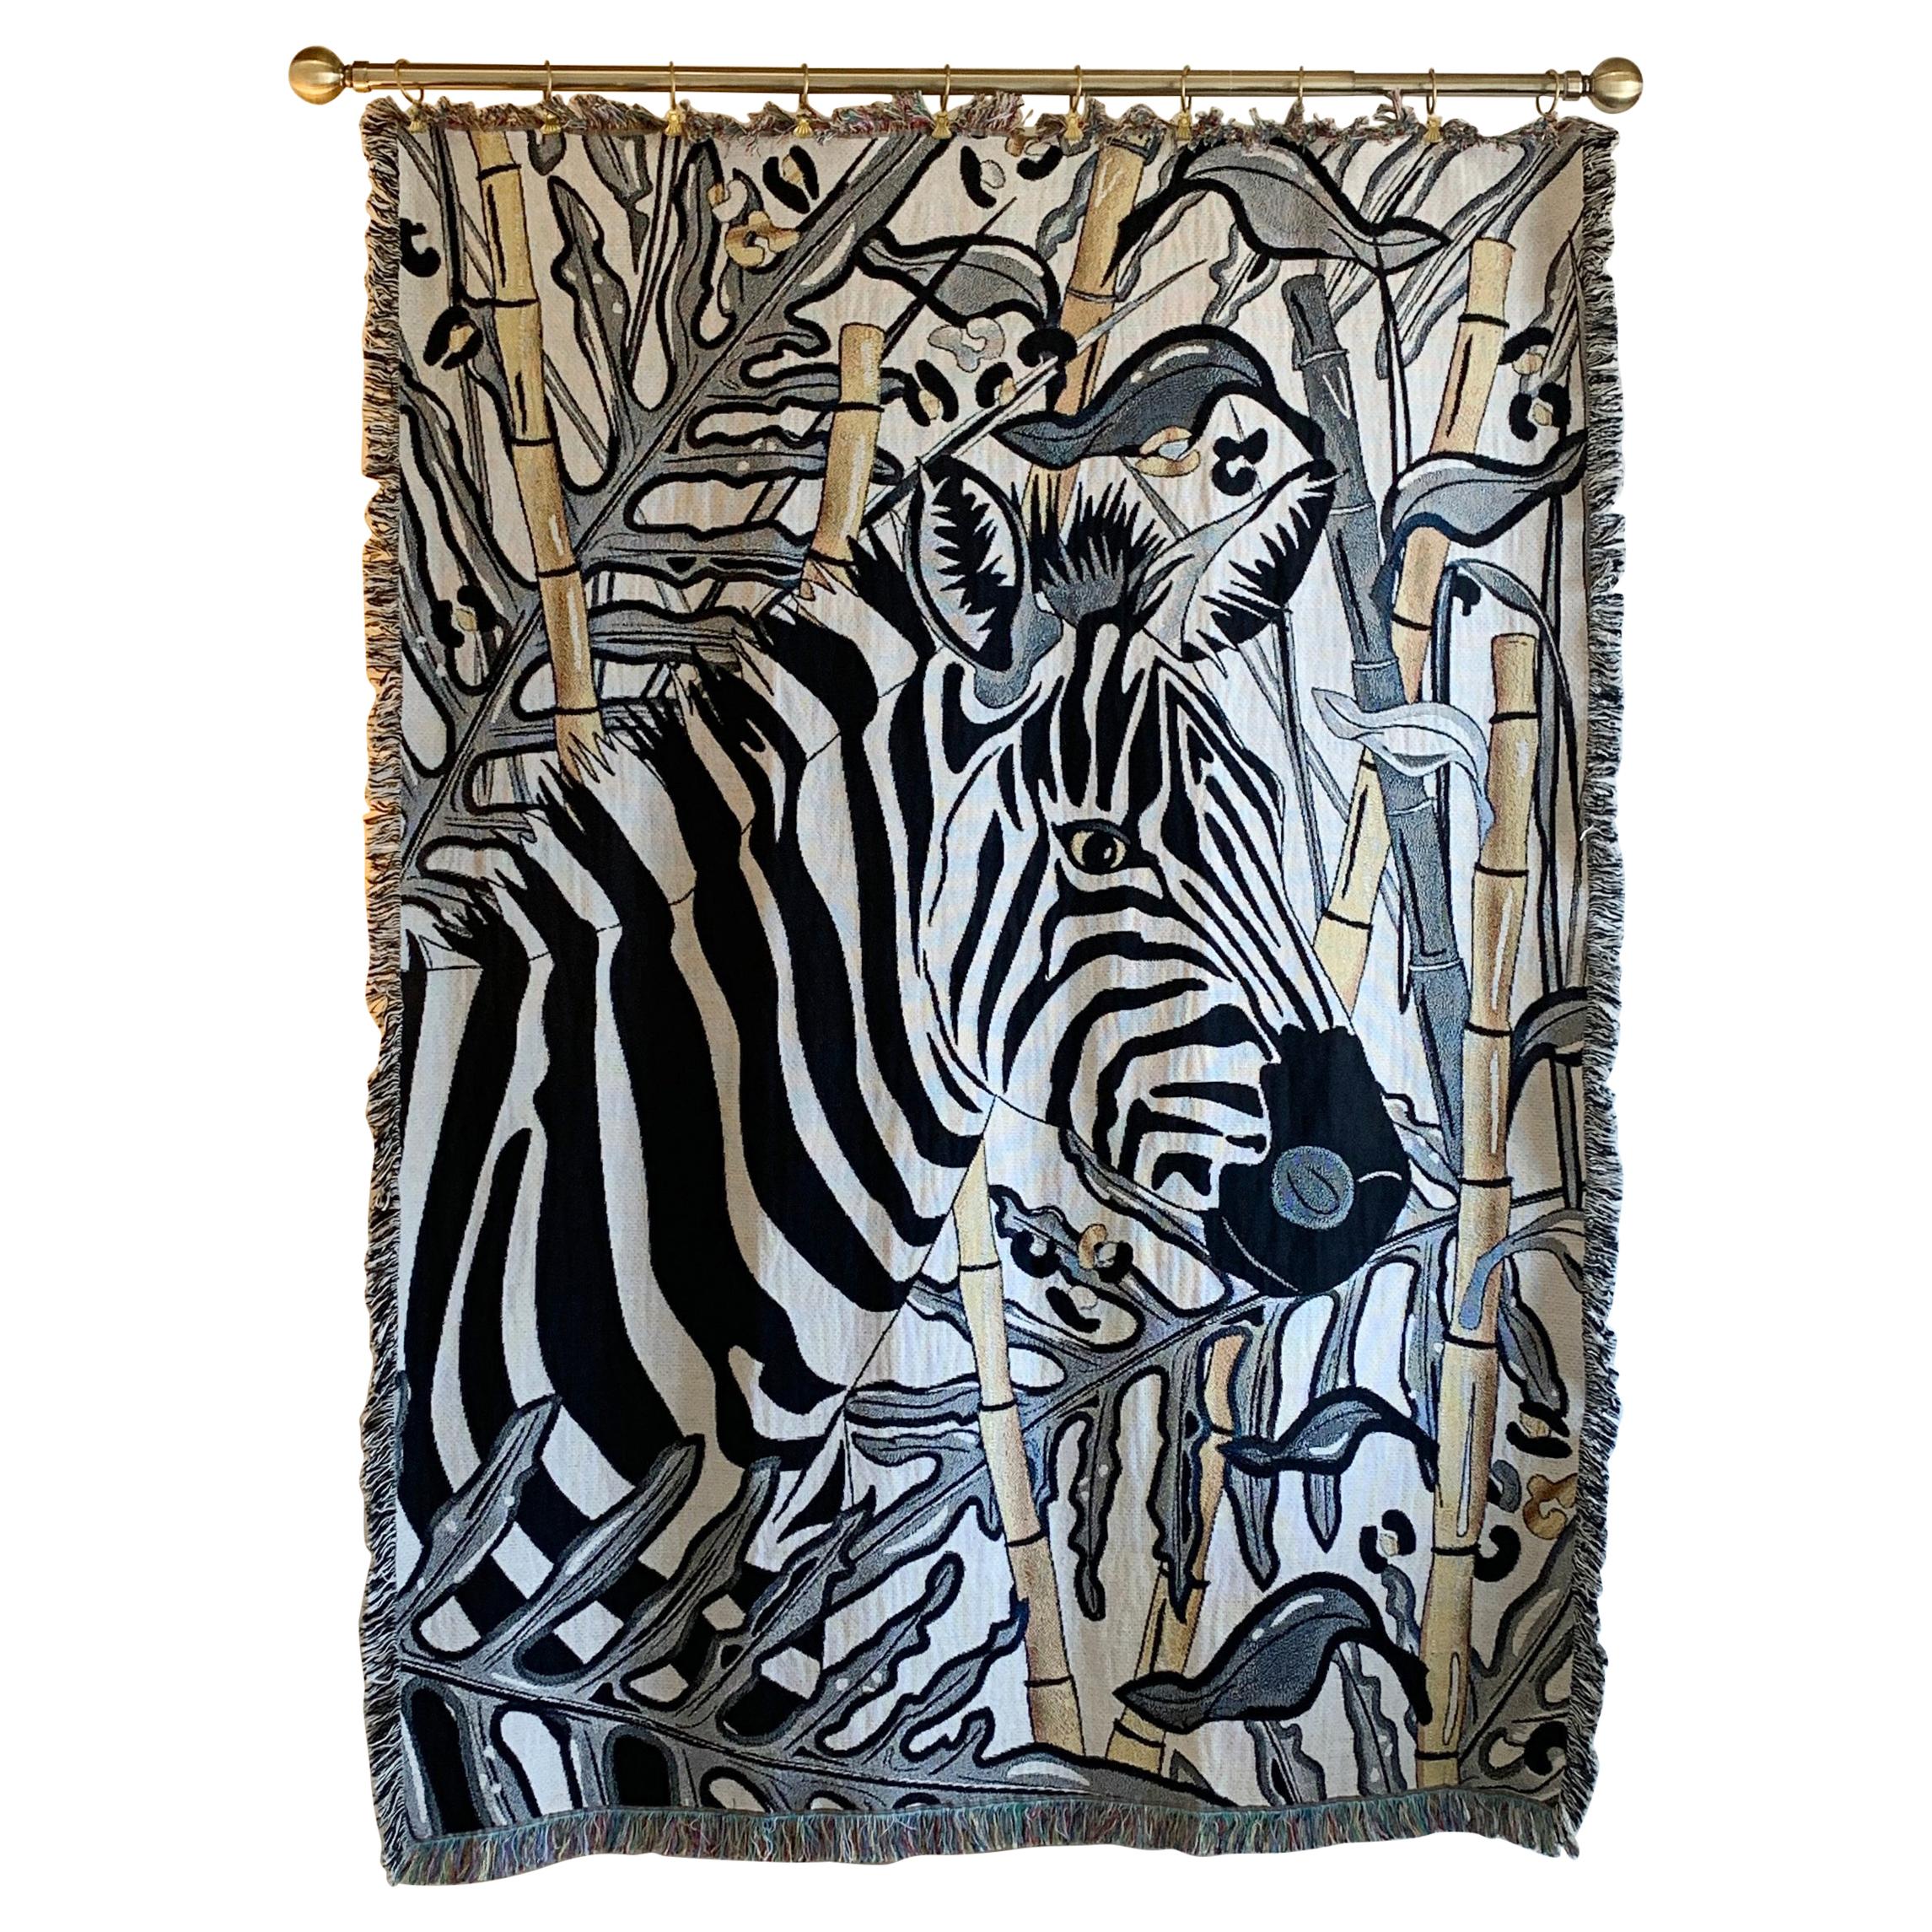 The Tropics Collection 'Zebra' Woven Throw Monochrome and Gold